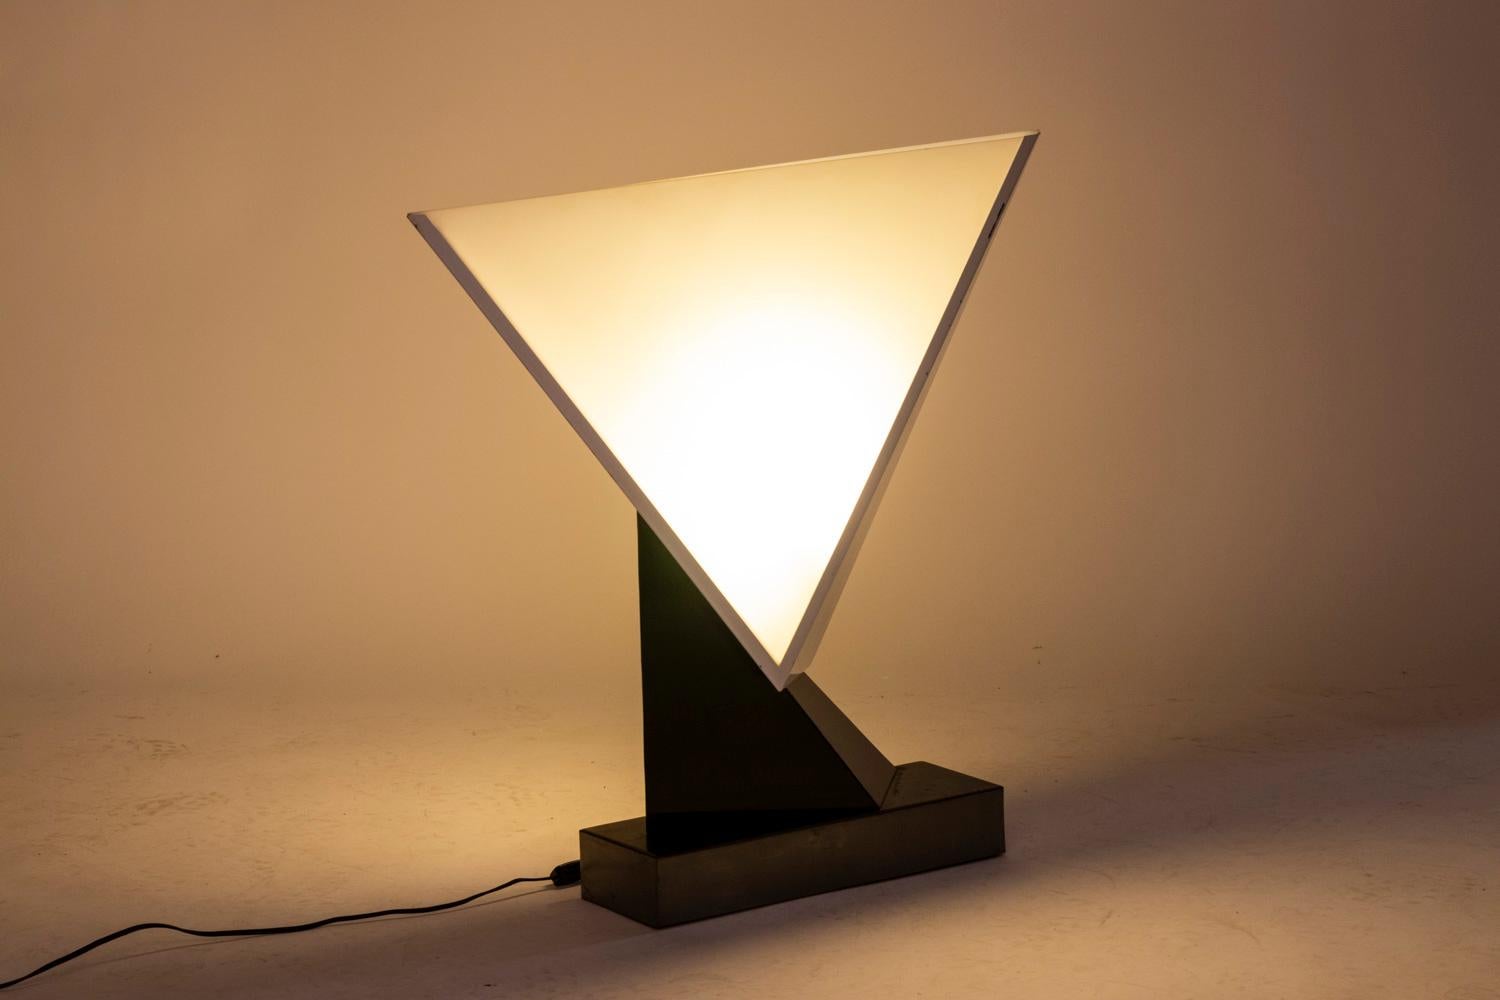 Curtis & Jeré, signed. 

Lamp in lacquered metal, gray and blue, geometric shape.

American work realized in 1983.